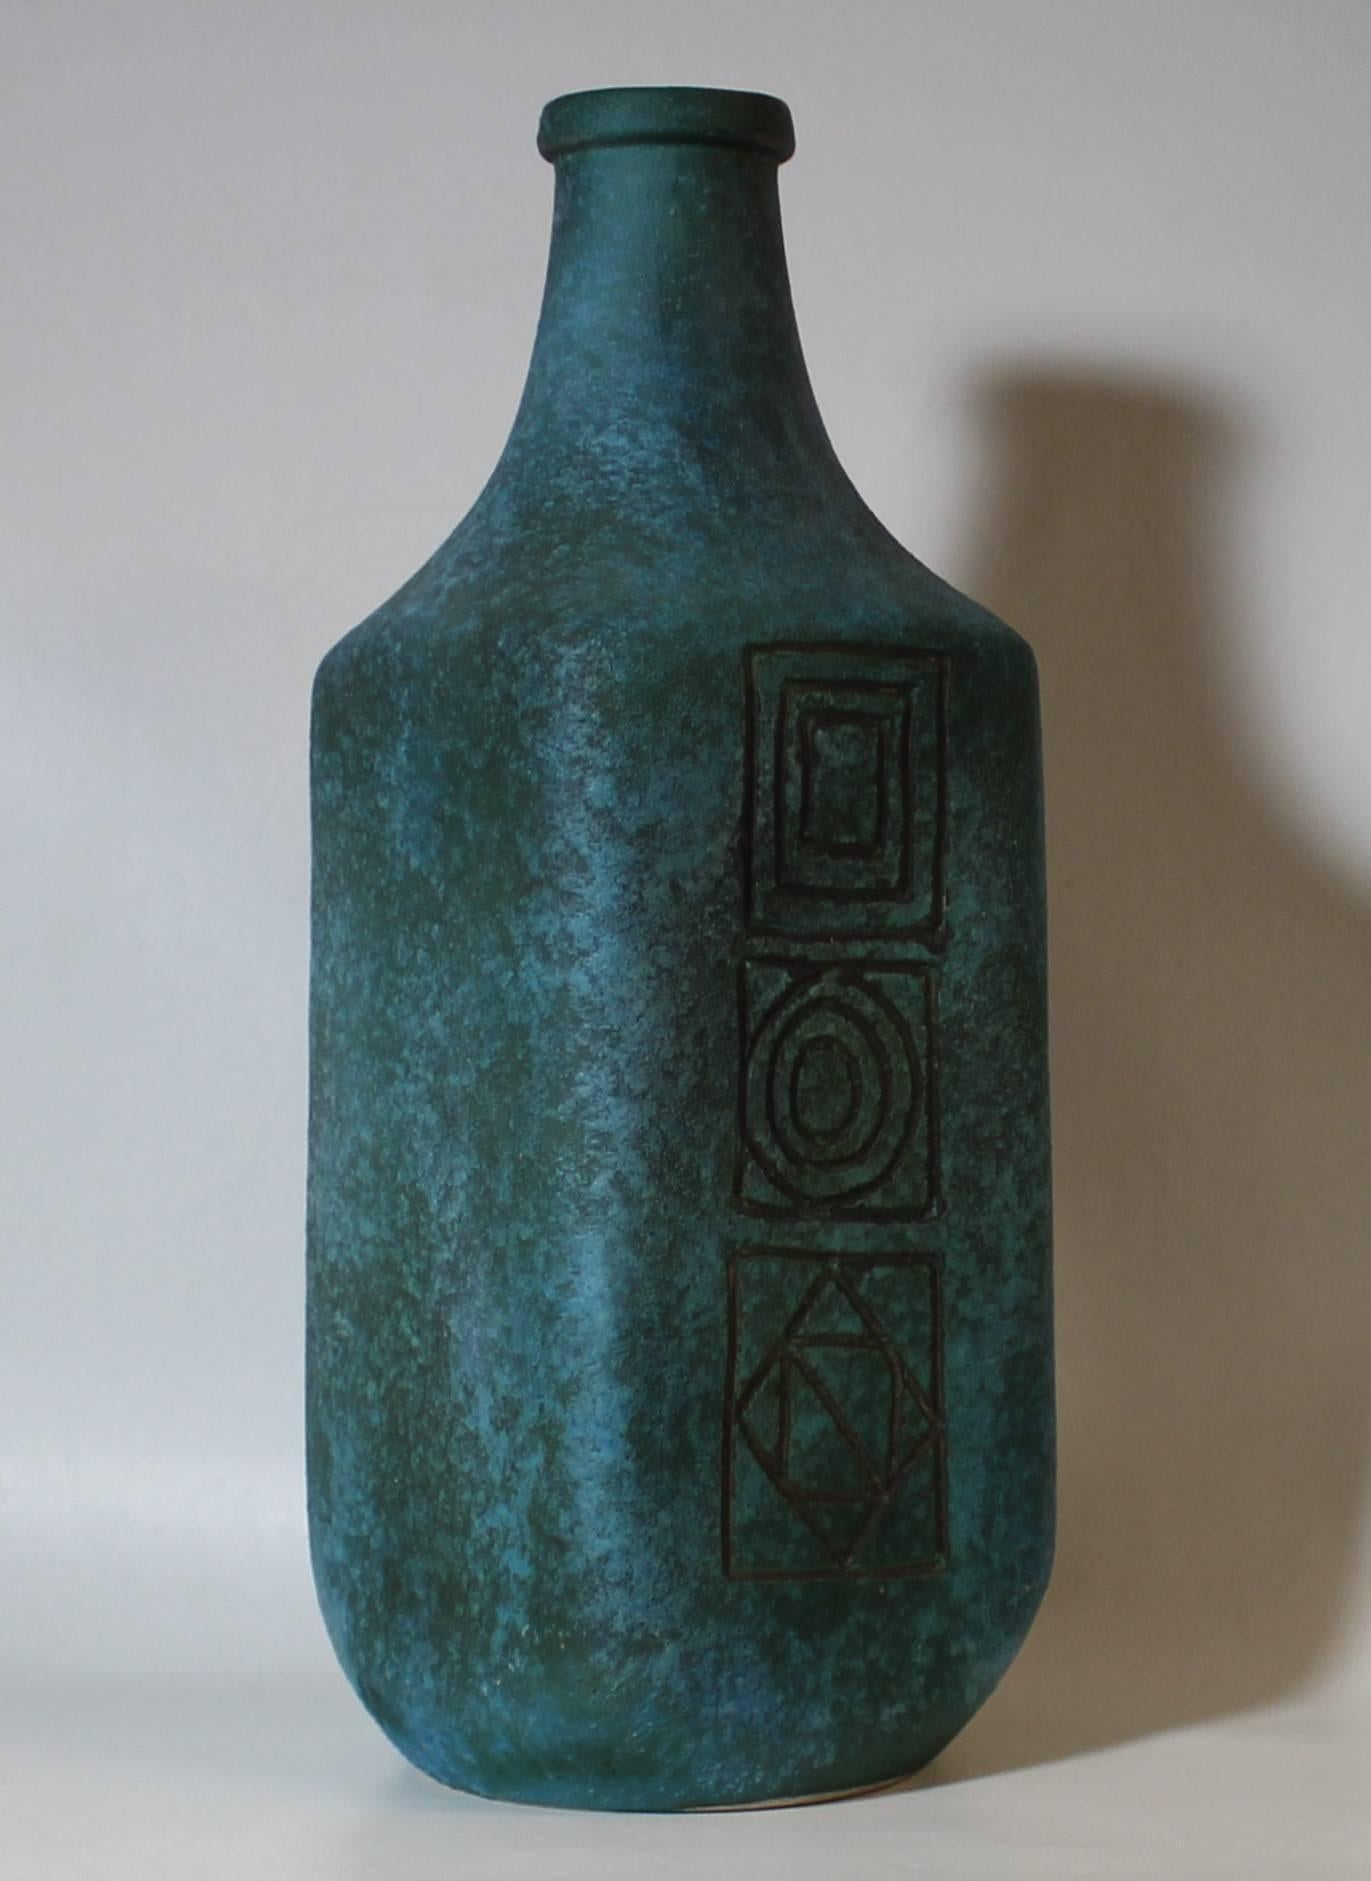 Large Italian Mid-Century Modern Sgrafitto pottery vase attributed to Guido Gambone. It features a turquoise body with geometric symbols.